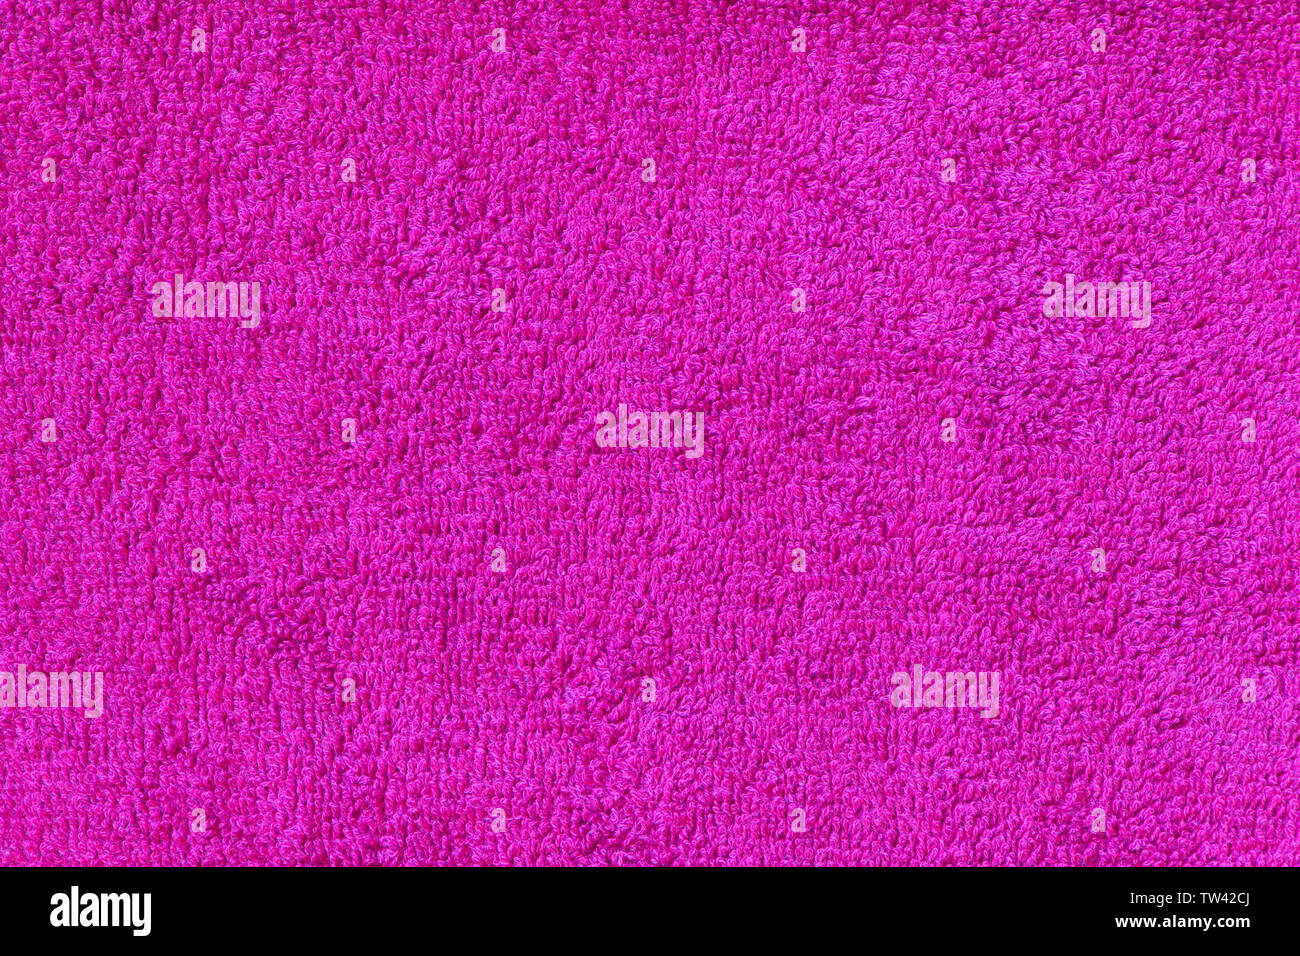 Pink terry towel background. Close-up fabric texture. Top view. Copy space. Vertical photography. Stock Photo